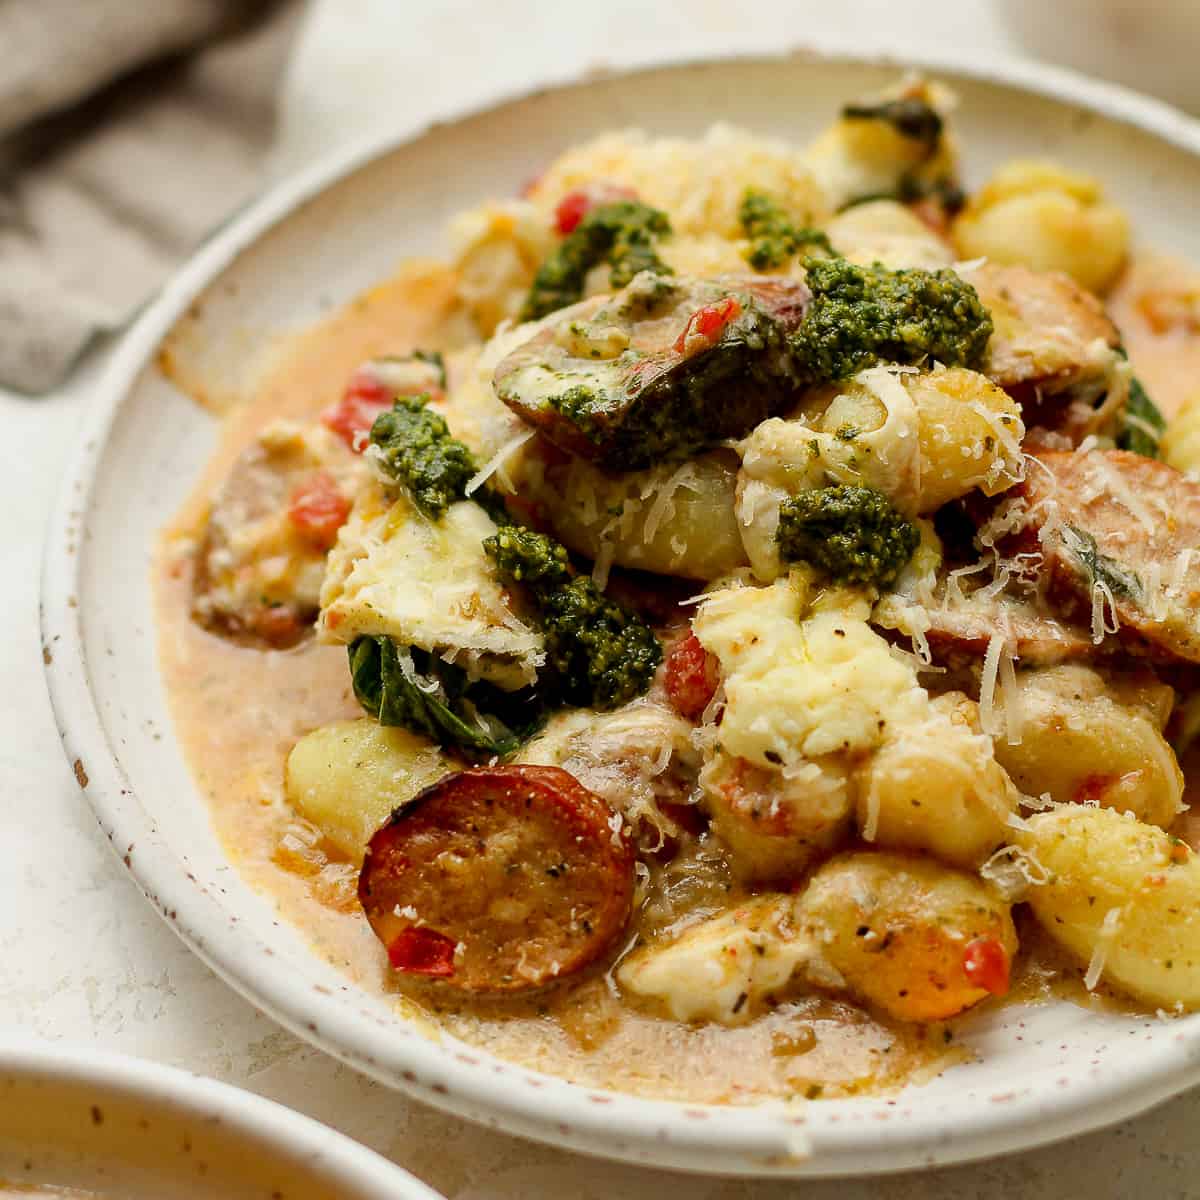 A plate of gnocchi and sausage.